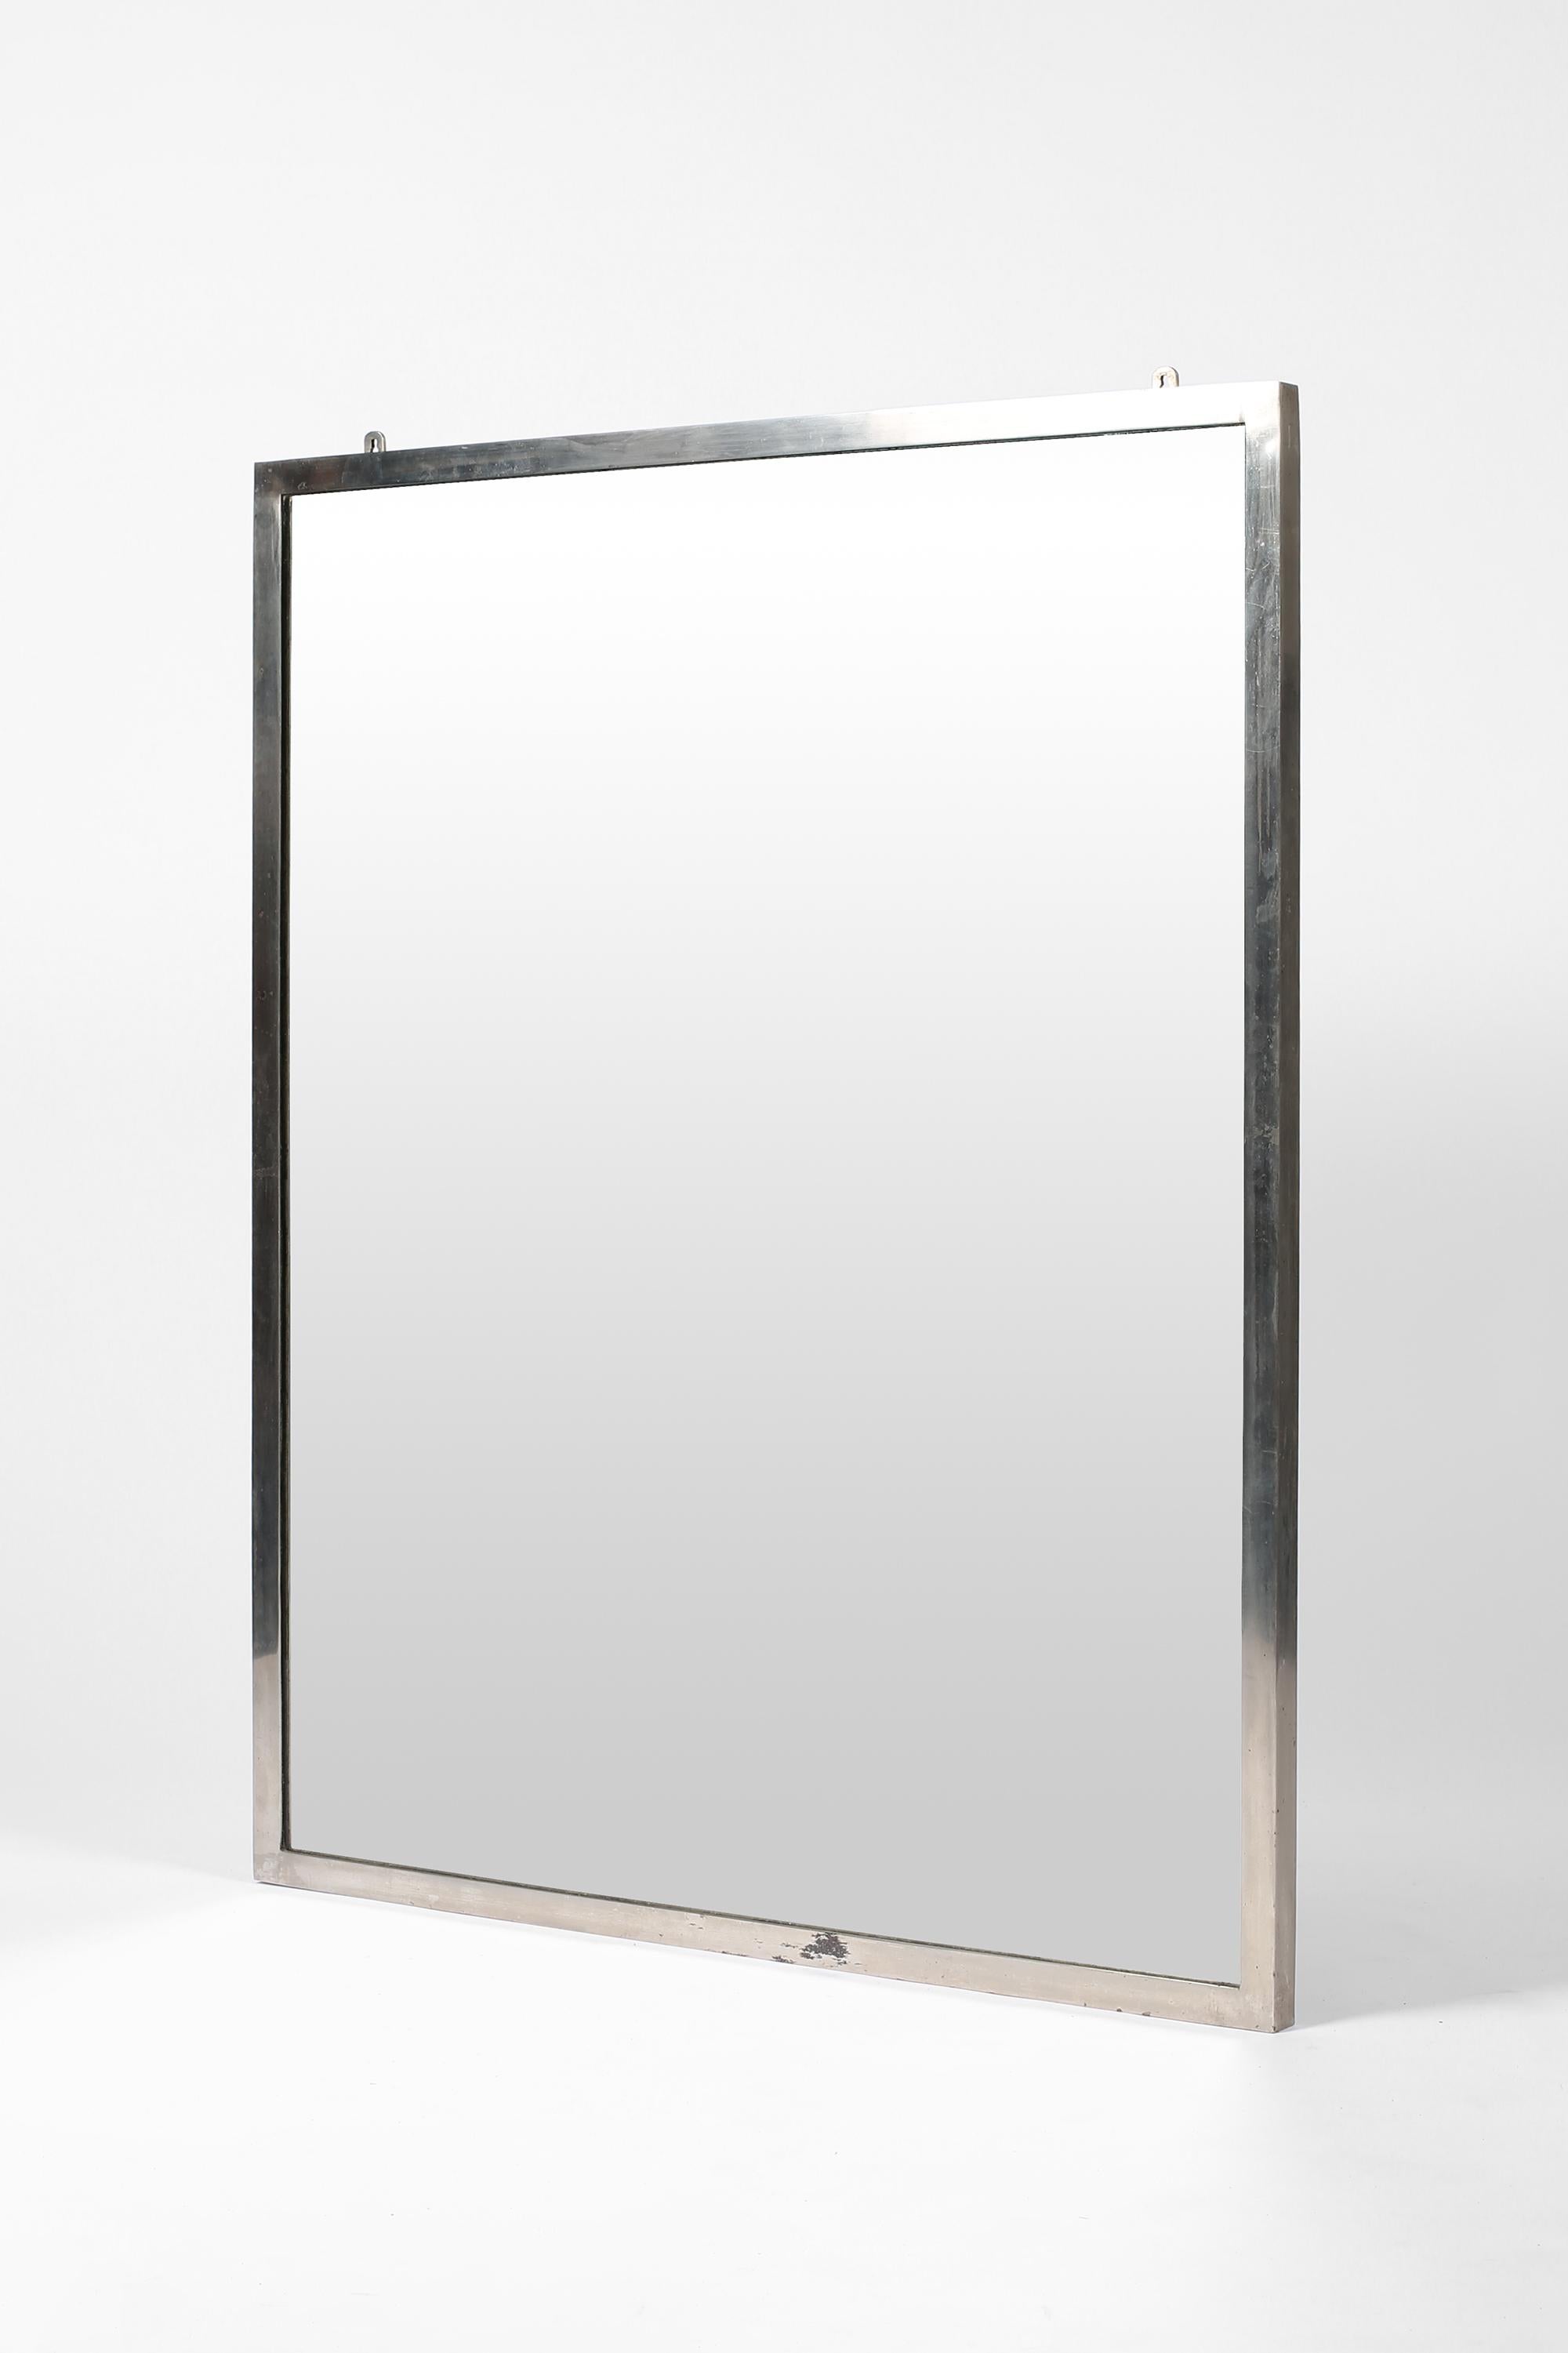 French 1930s Modernist Nickel-Plated Maison Desny Mirror For Sale 8